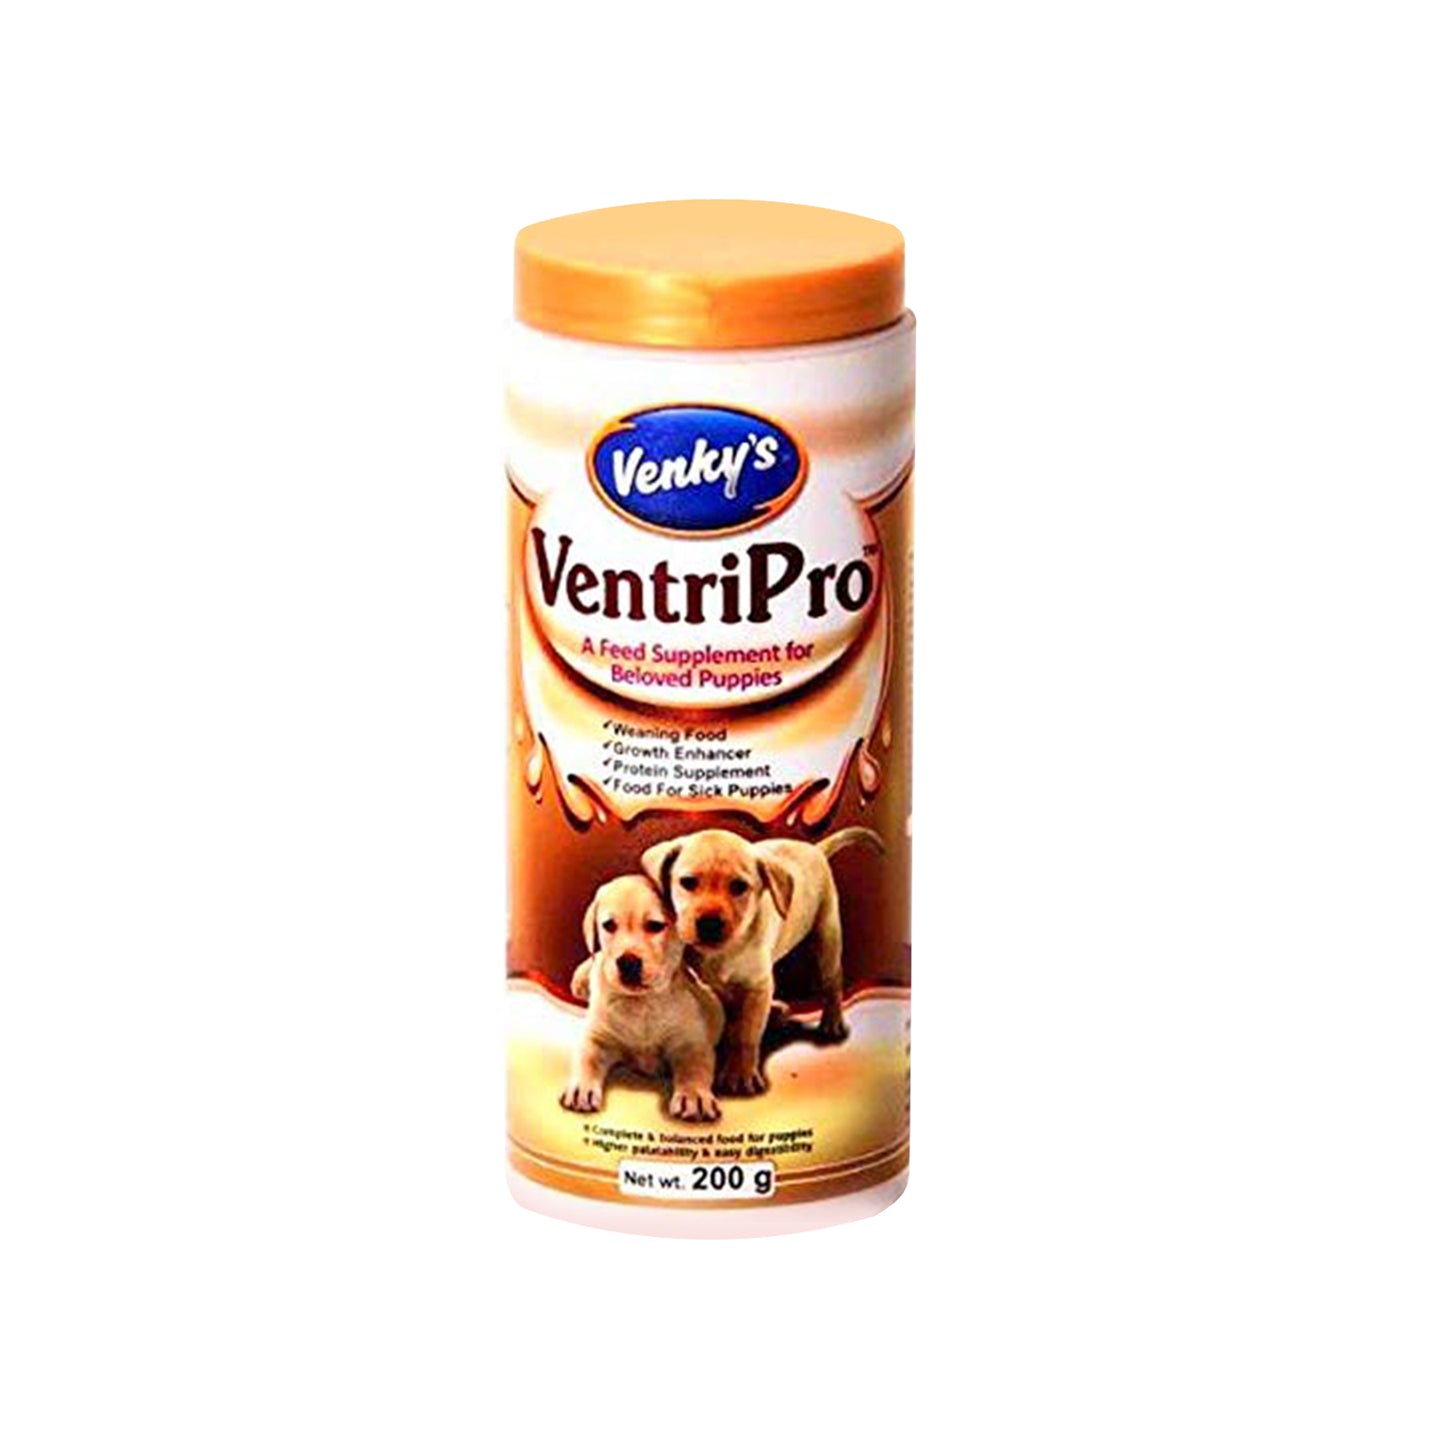 Venkys -  Ventripro Puppy Feed supplement